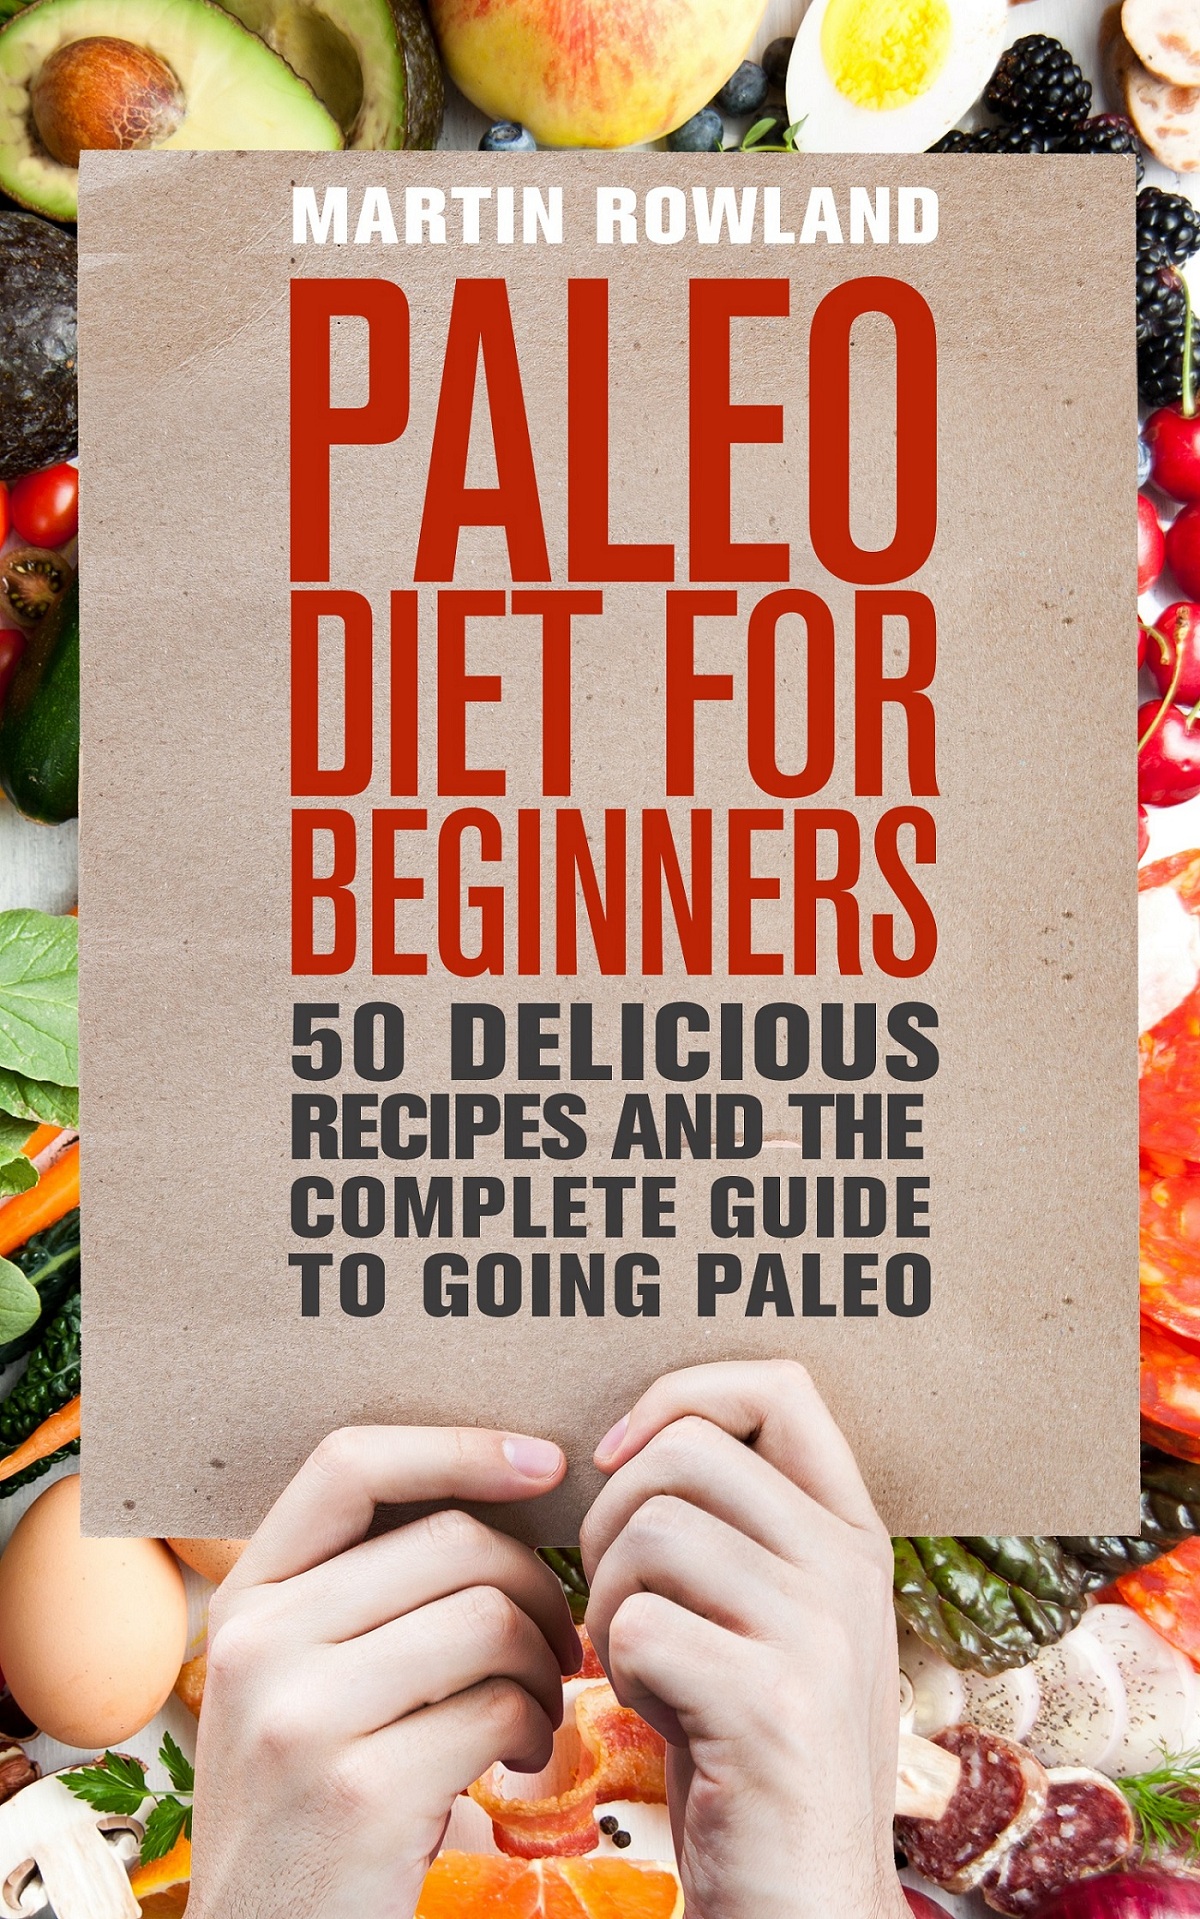 FREE: Paleo: Paleo Diet For Beginners: 50 Delicious Recipes And The Complete Guide To Going Paleo by Martin Rowland